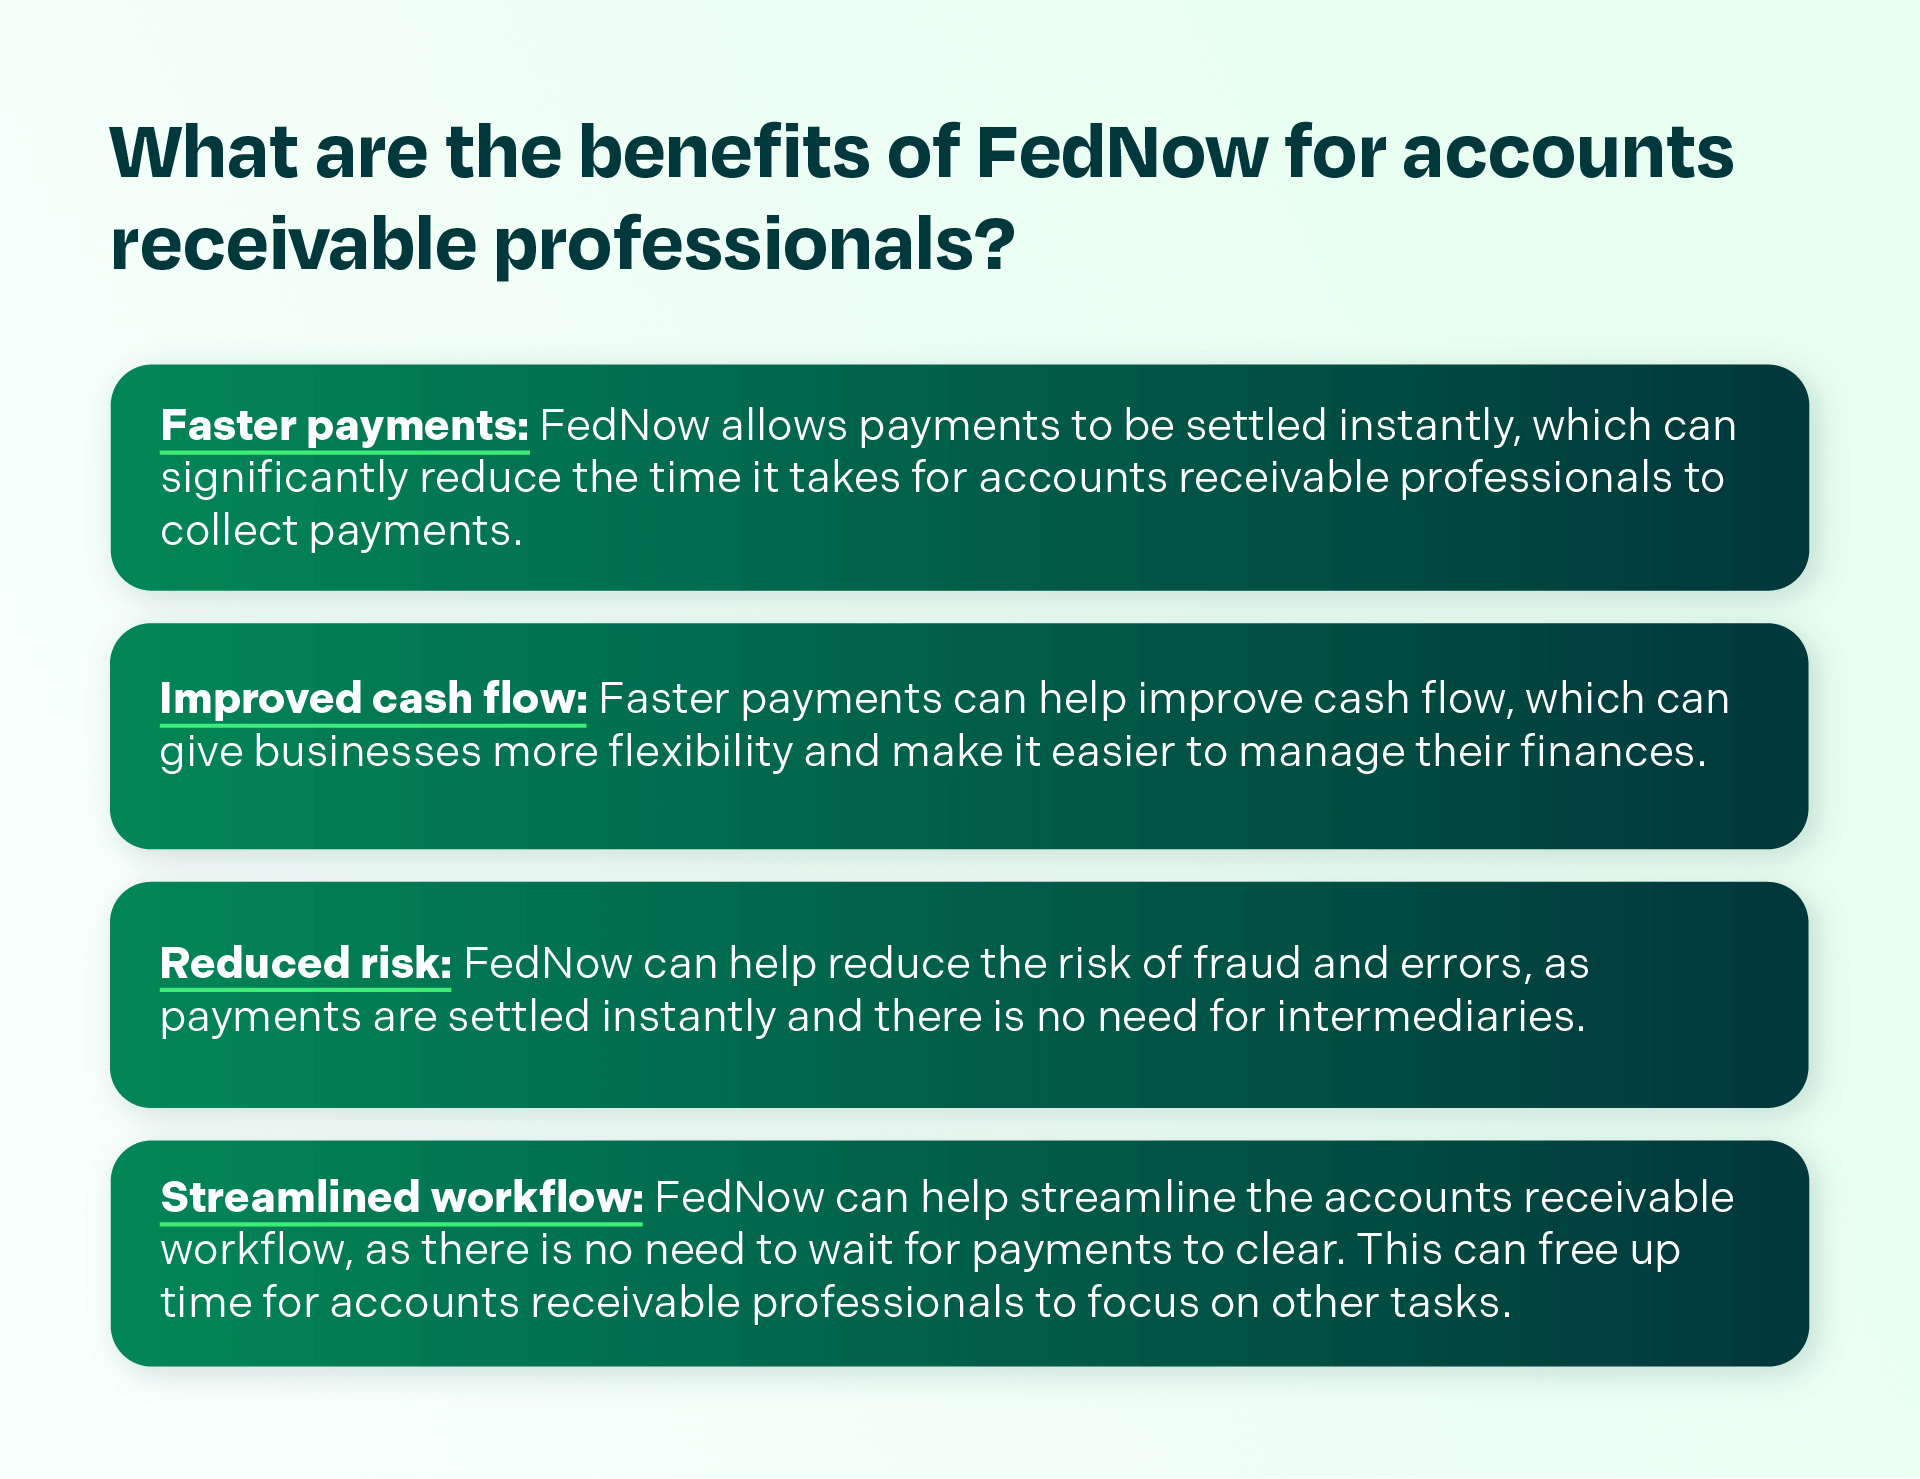 list of the benefits of FedNow for accounts receivable professionals